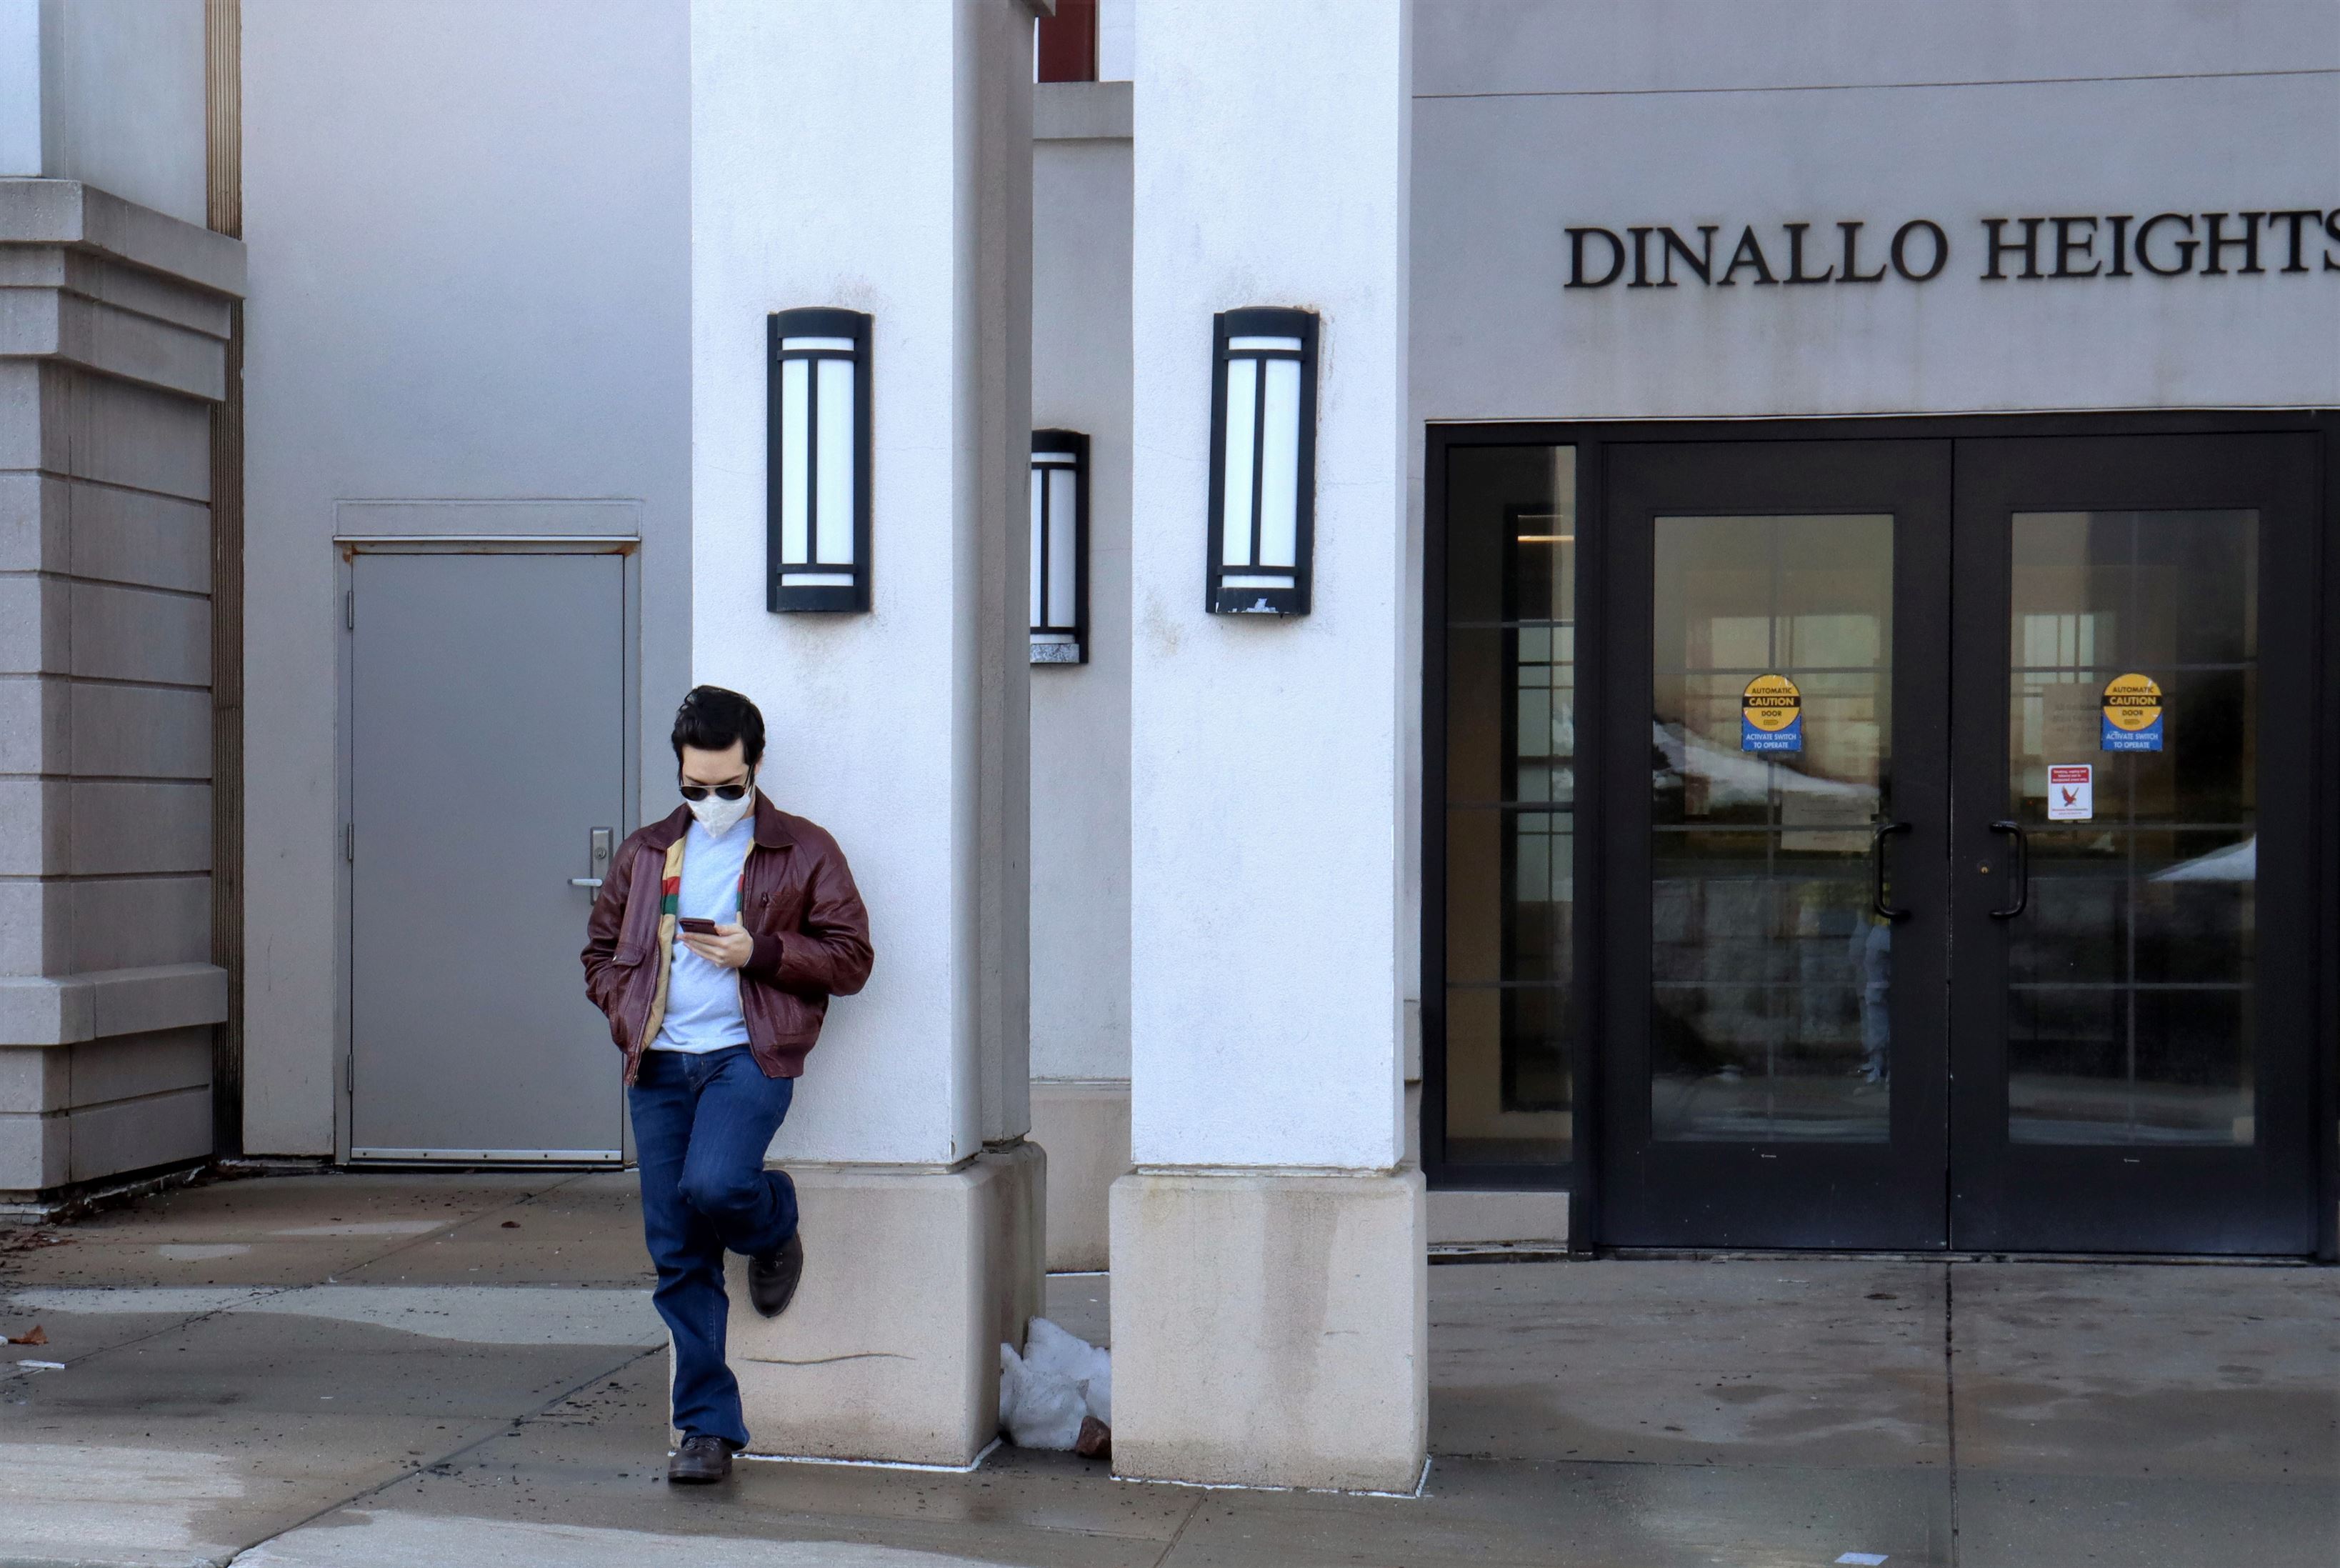 A student waits for a ride outside of Dinallo Heights. John La Rosa | The Montclarion